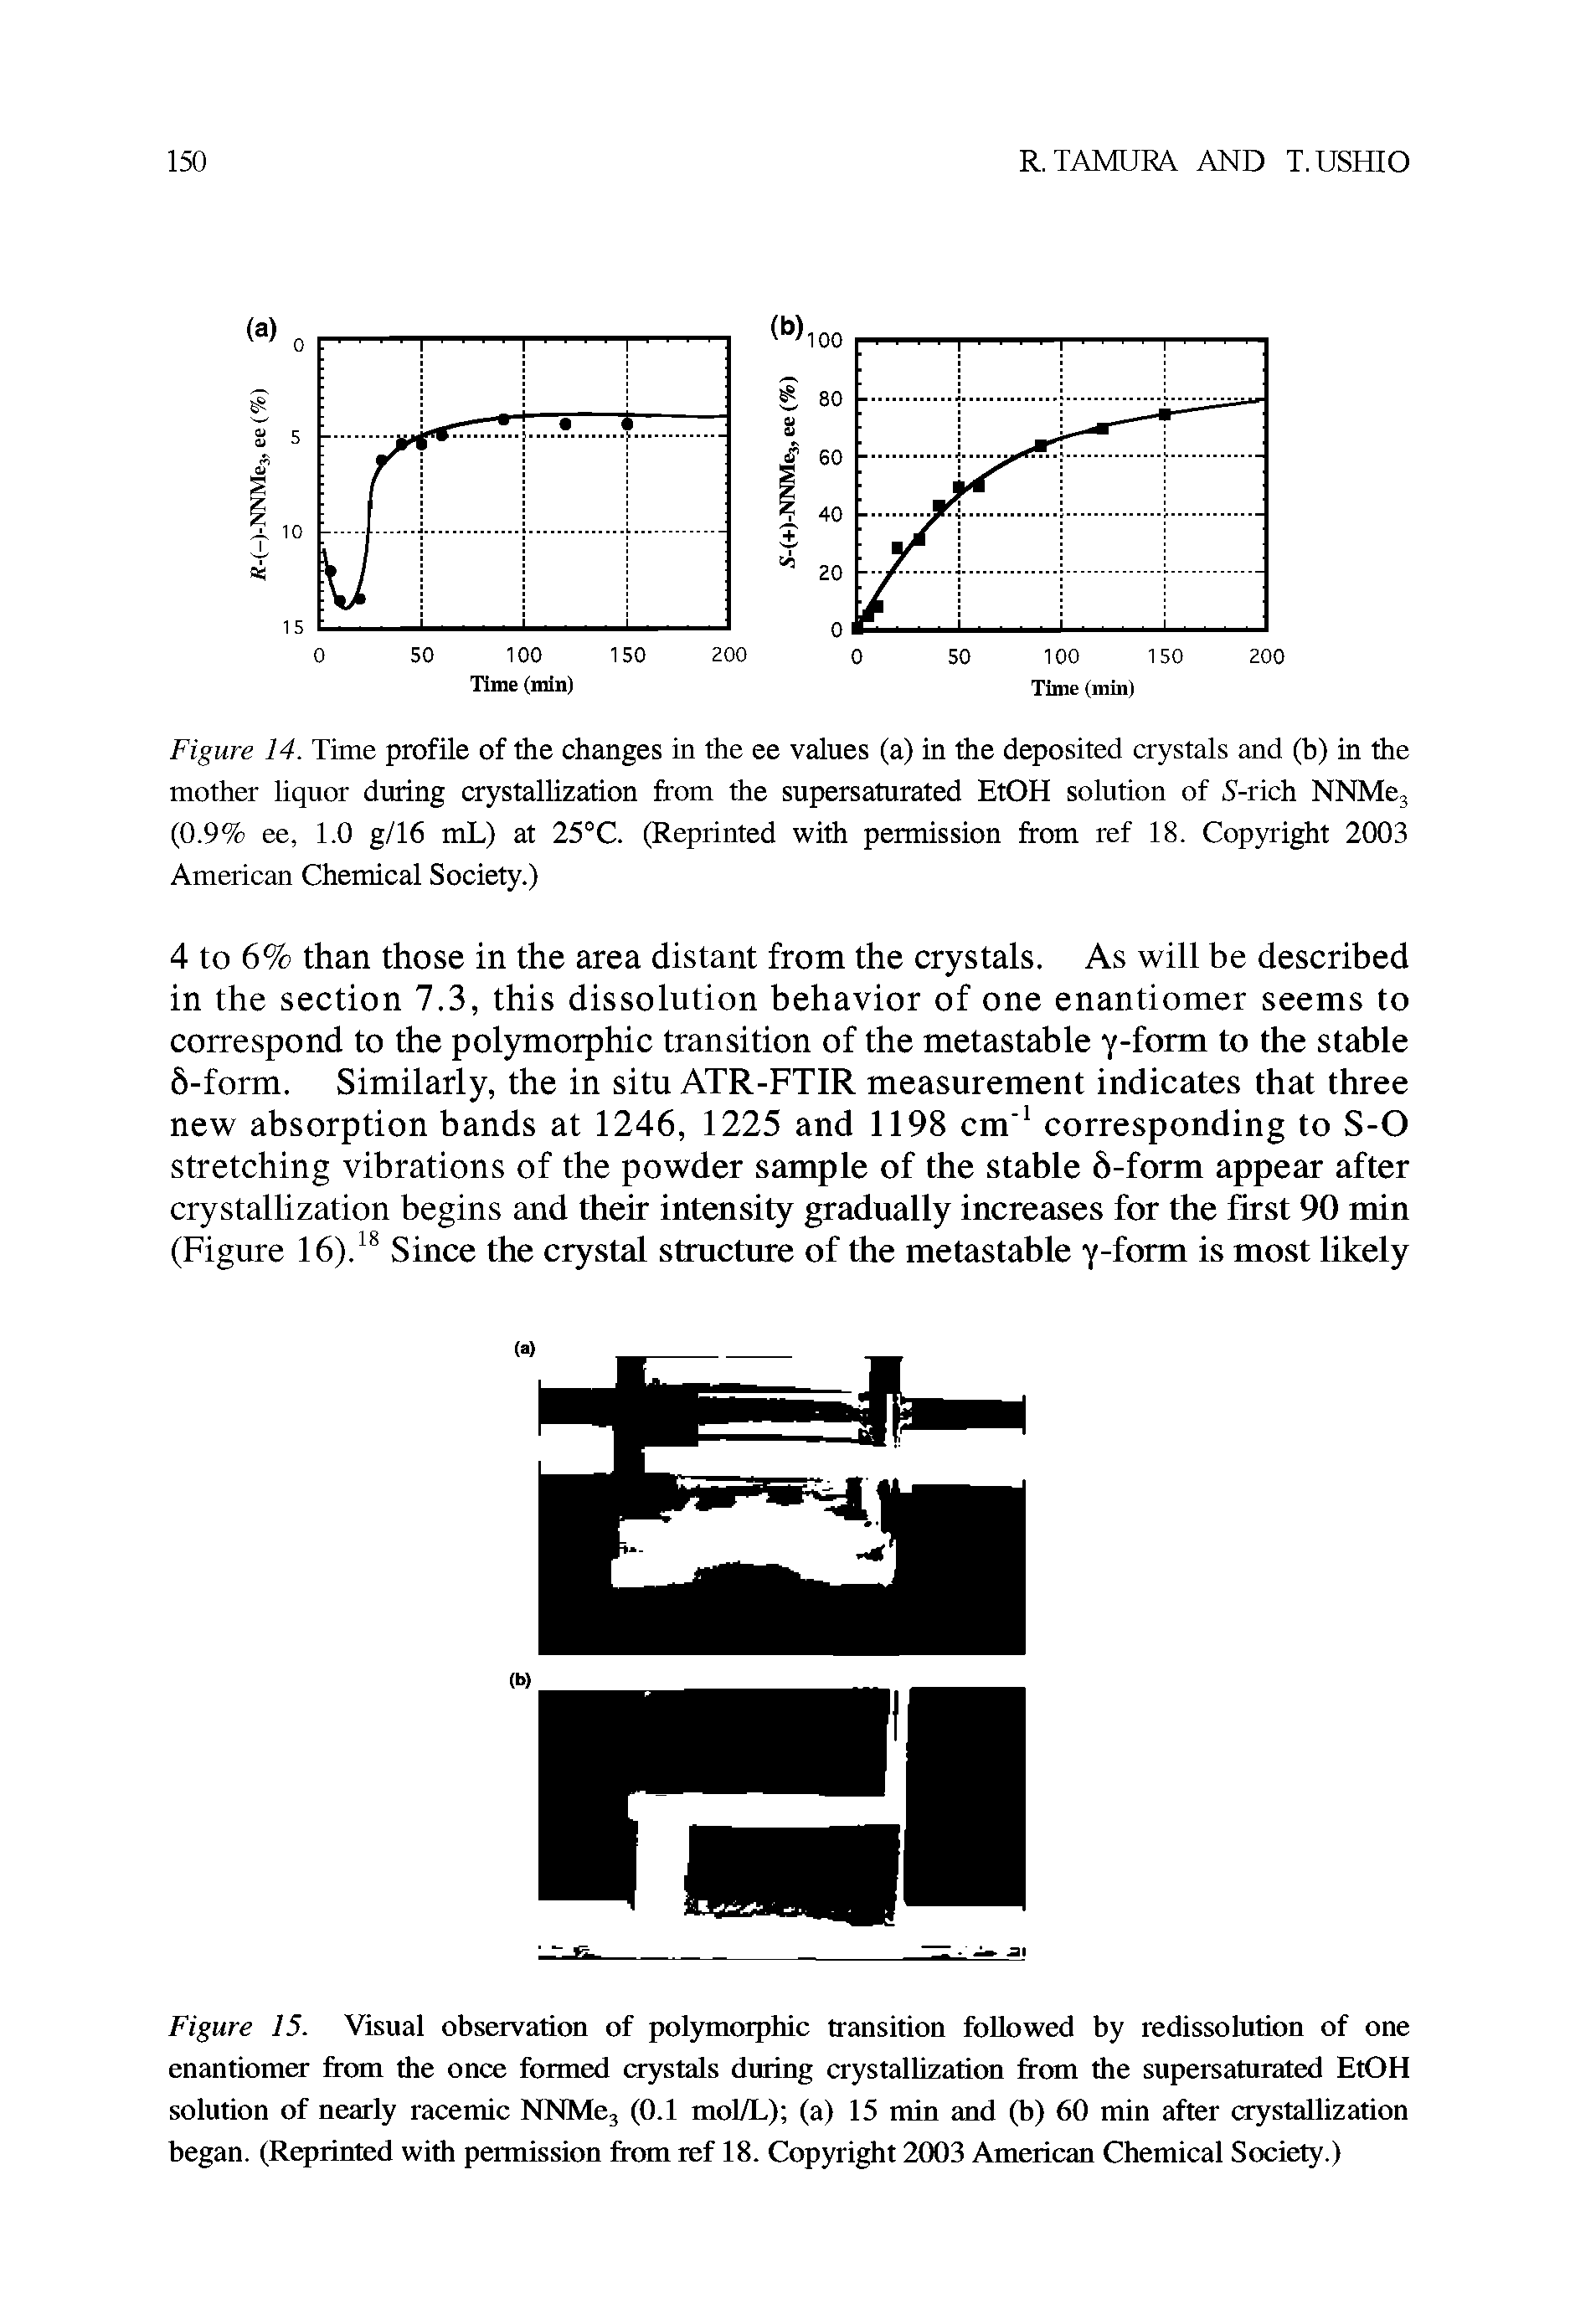 Figure 15. Visual observation of polymorphic transition followed by redissolution of one enantiomer from the once formed crystals during crystallization from the supersaturated EtOH solution of nearly racemic NNMe3 (0.1 mol/L) (a) 15 min and (b) 60 min after crystallization began. (Reprinted with permission from ref 18. Copyright 2003 American Chemical Society.)...